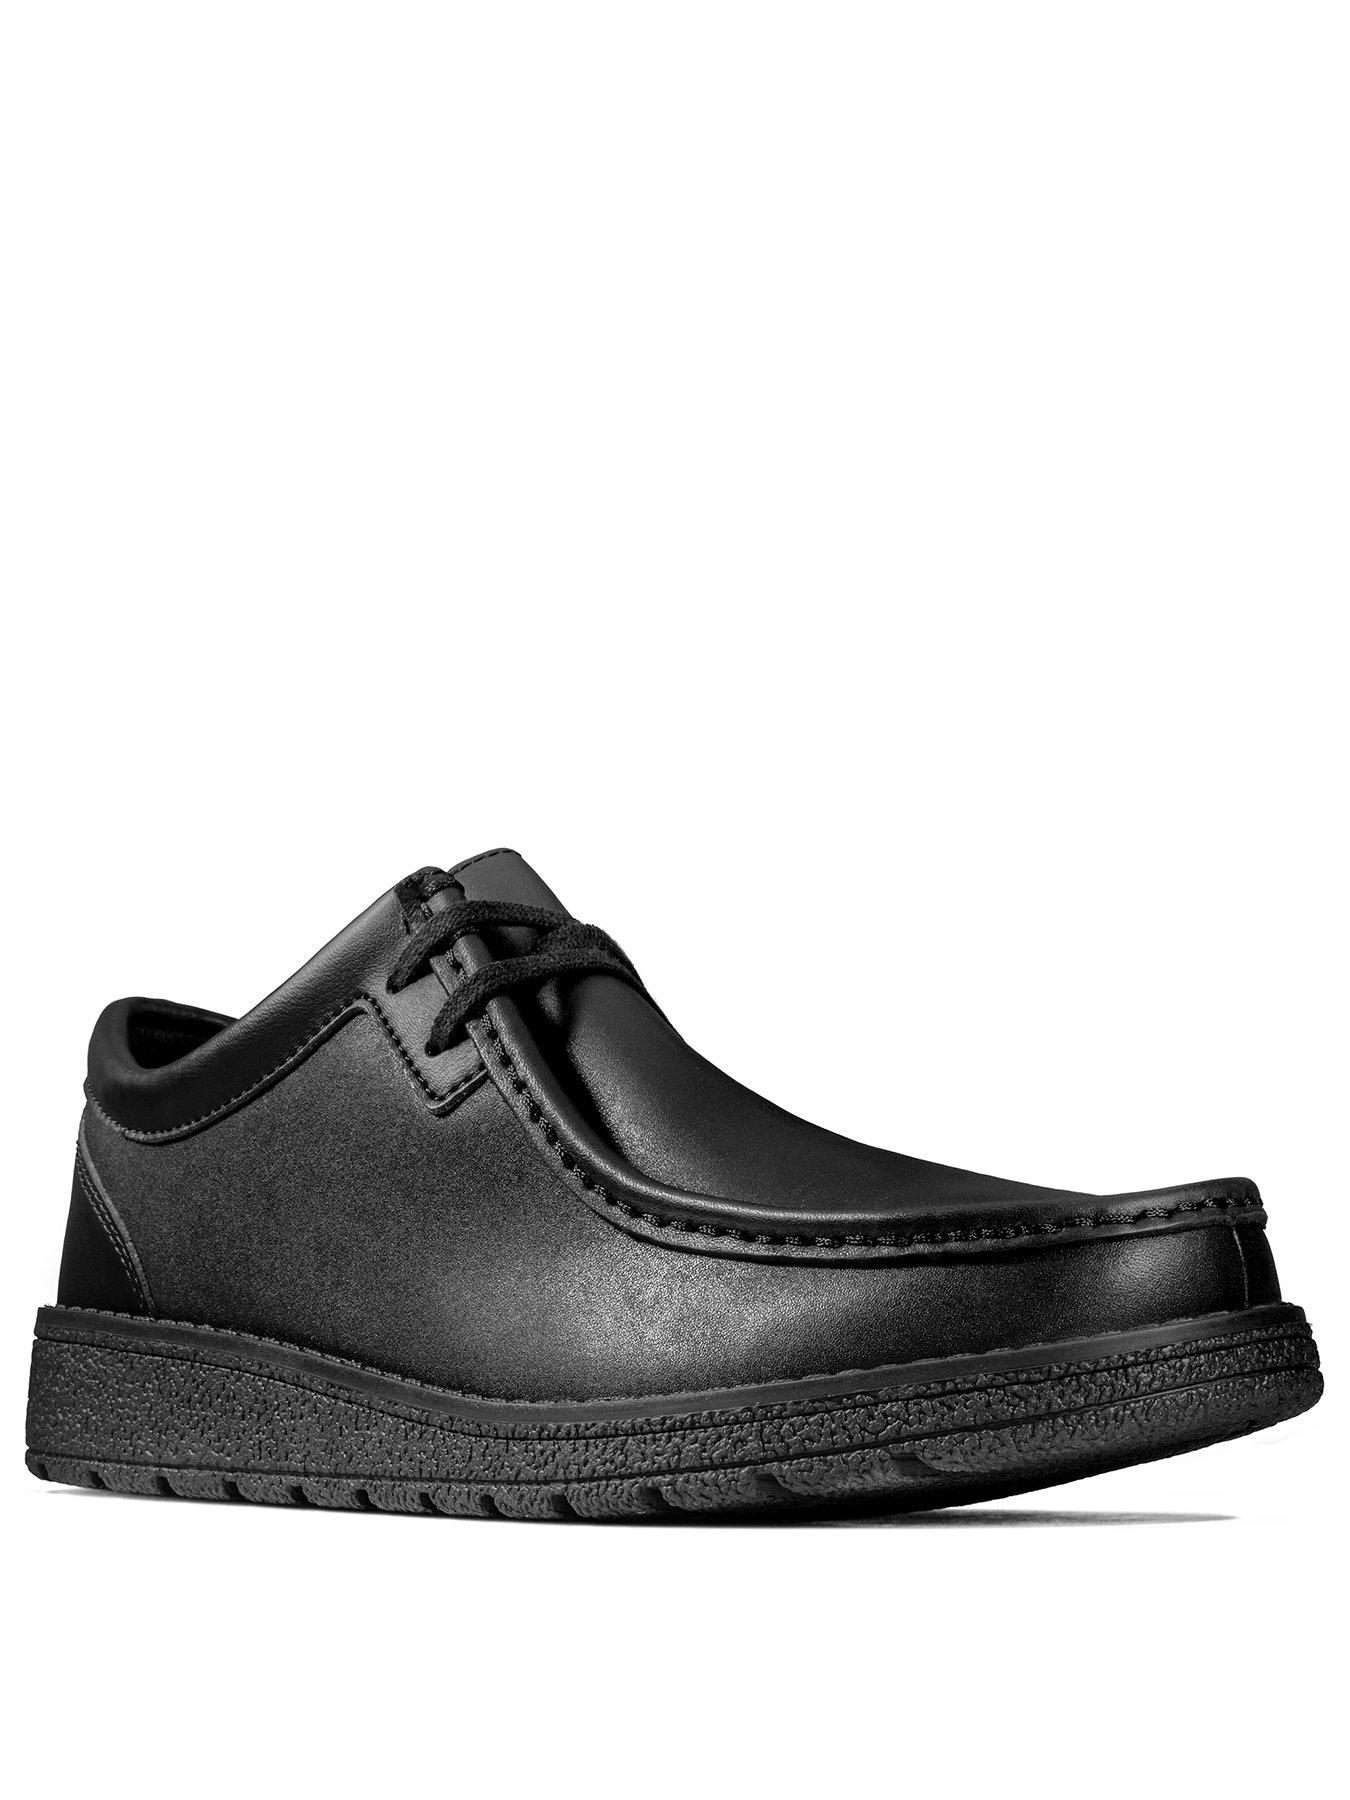 clarks youth school shoes